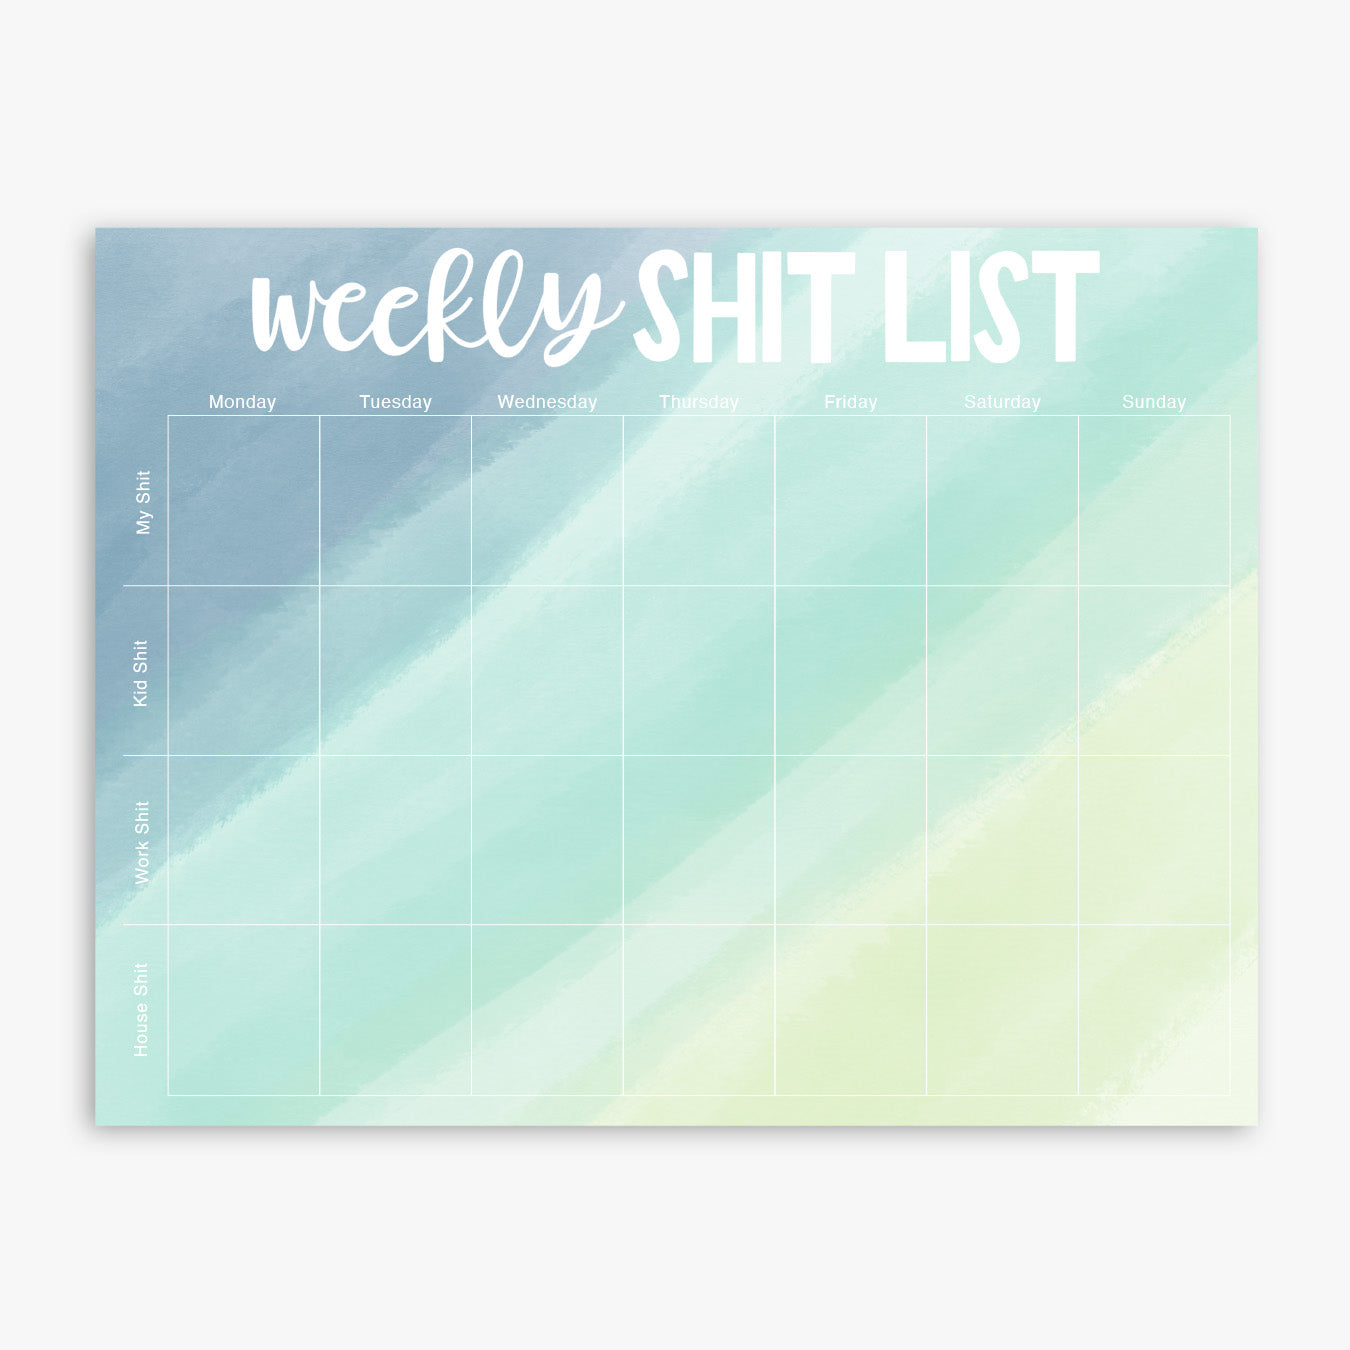 Weekly Shit List Notepad